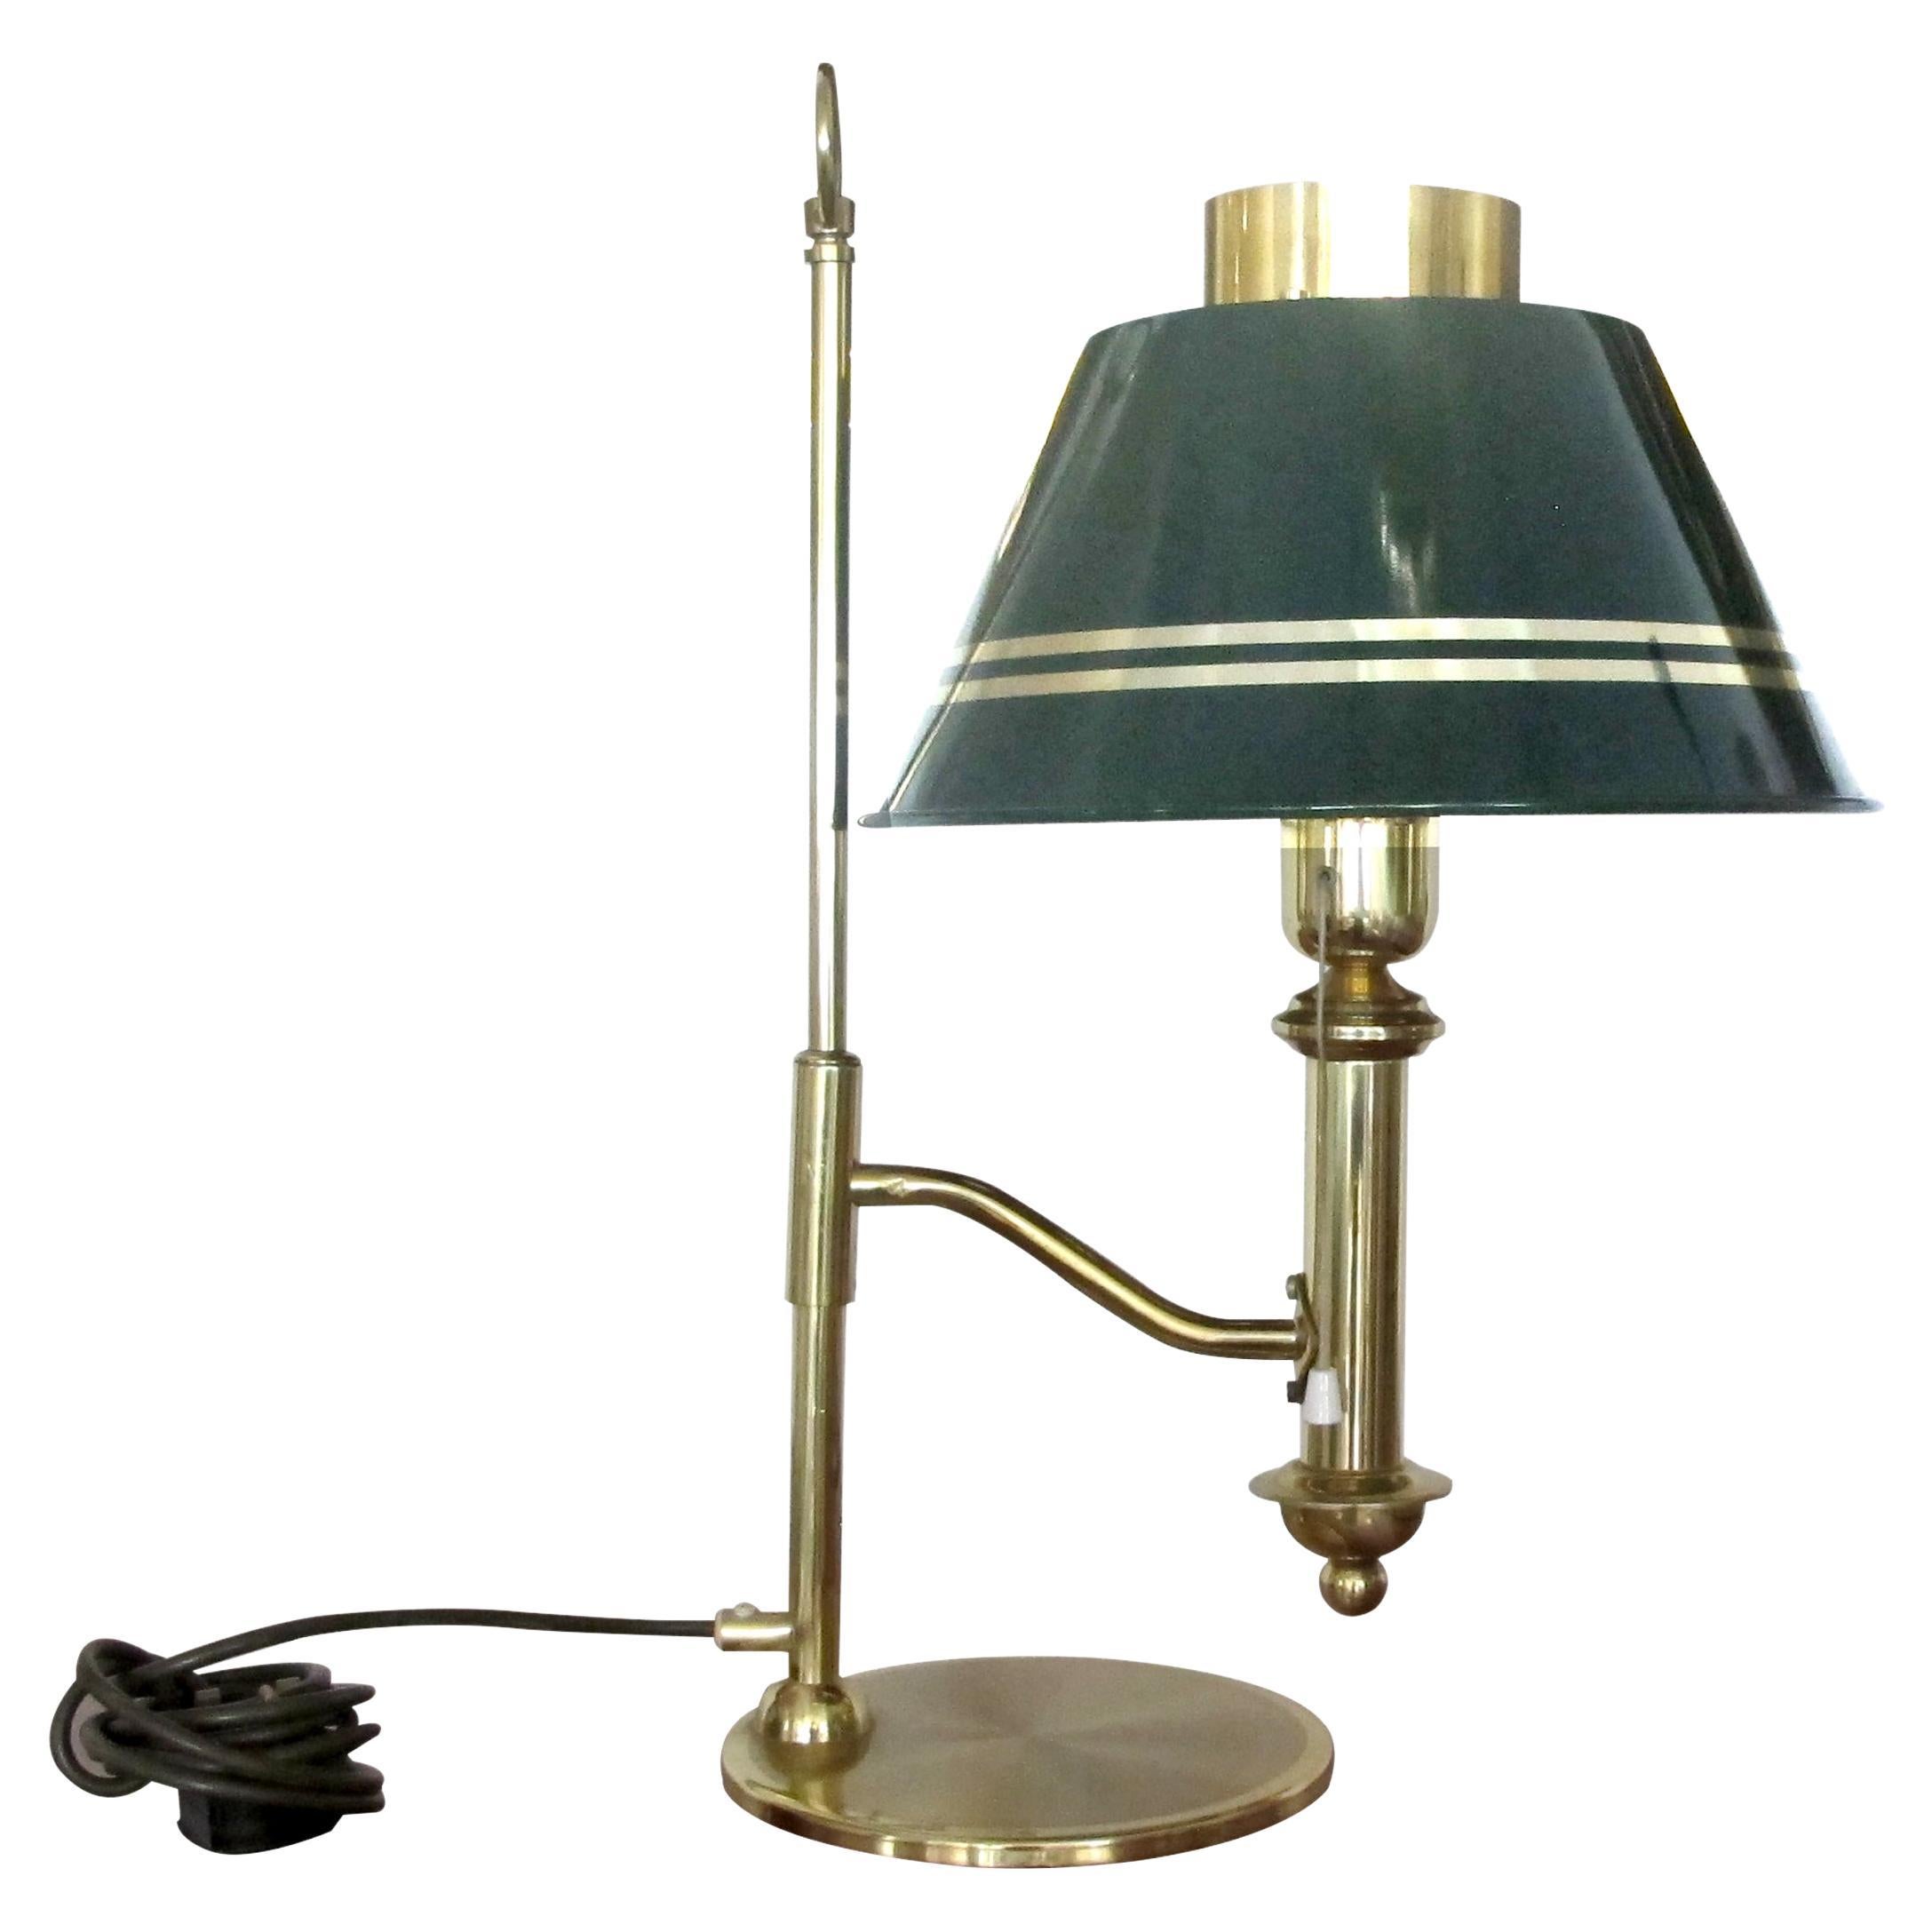 1970s Large Brass Desk Table Lamp with Green Metal Shade, Swedish For Sale